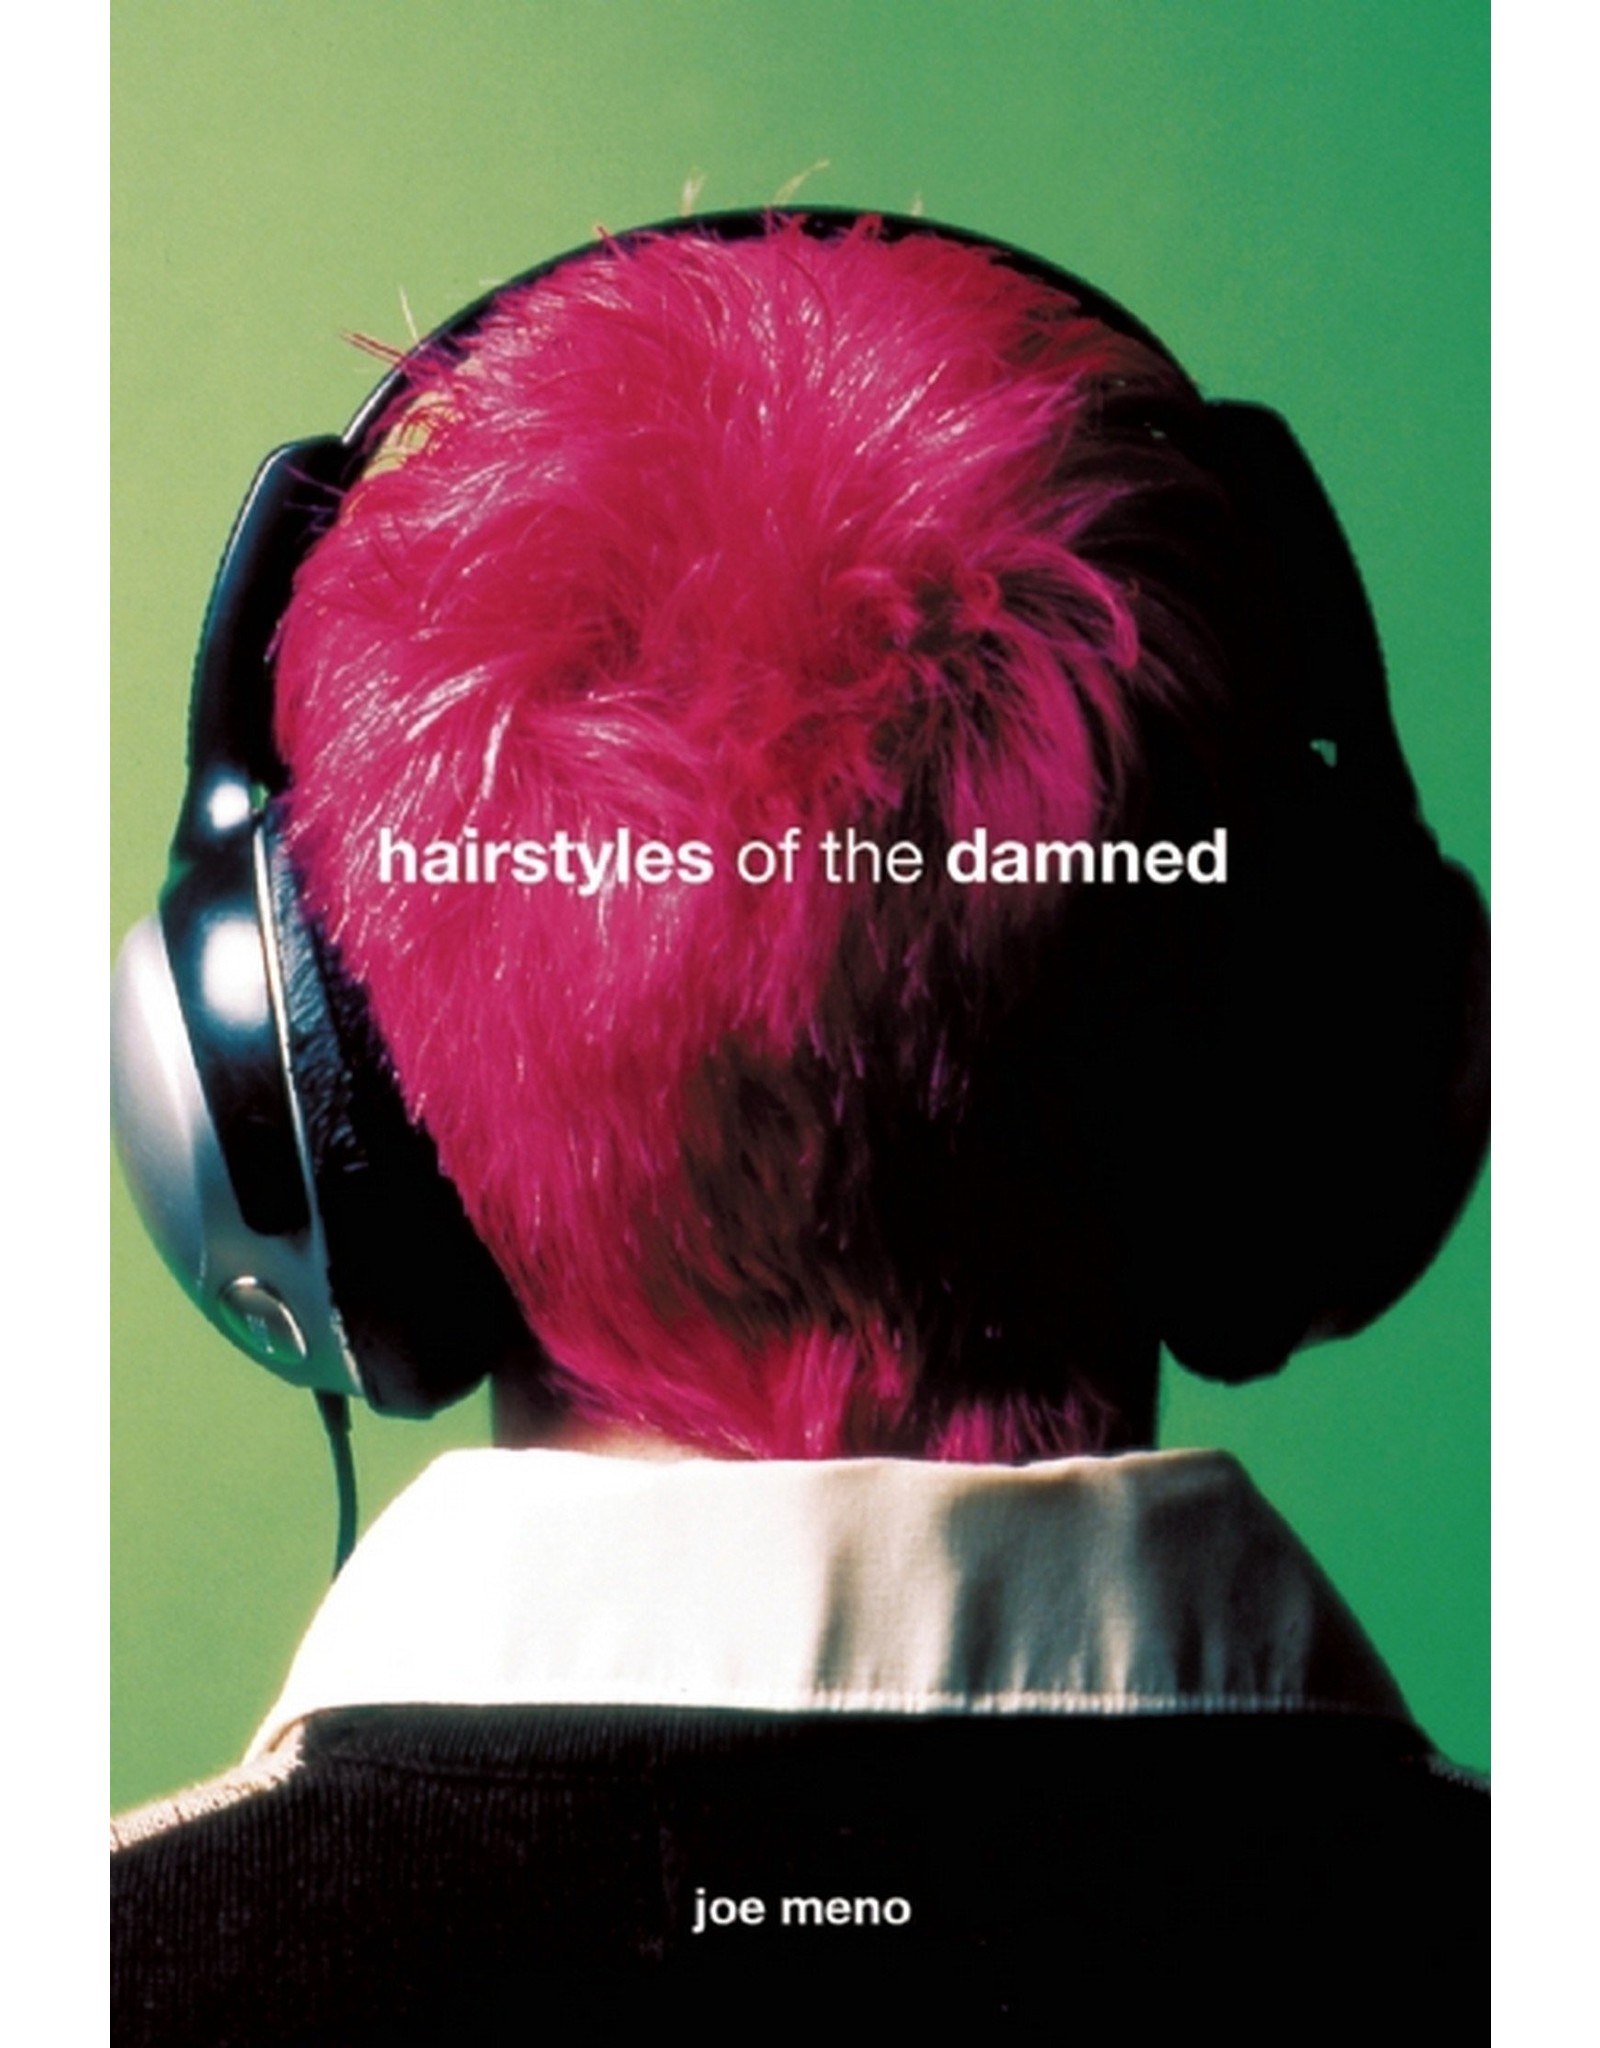 Literature Hairstyles of the Damned